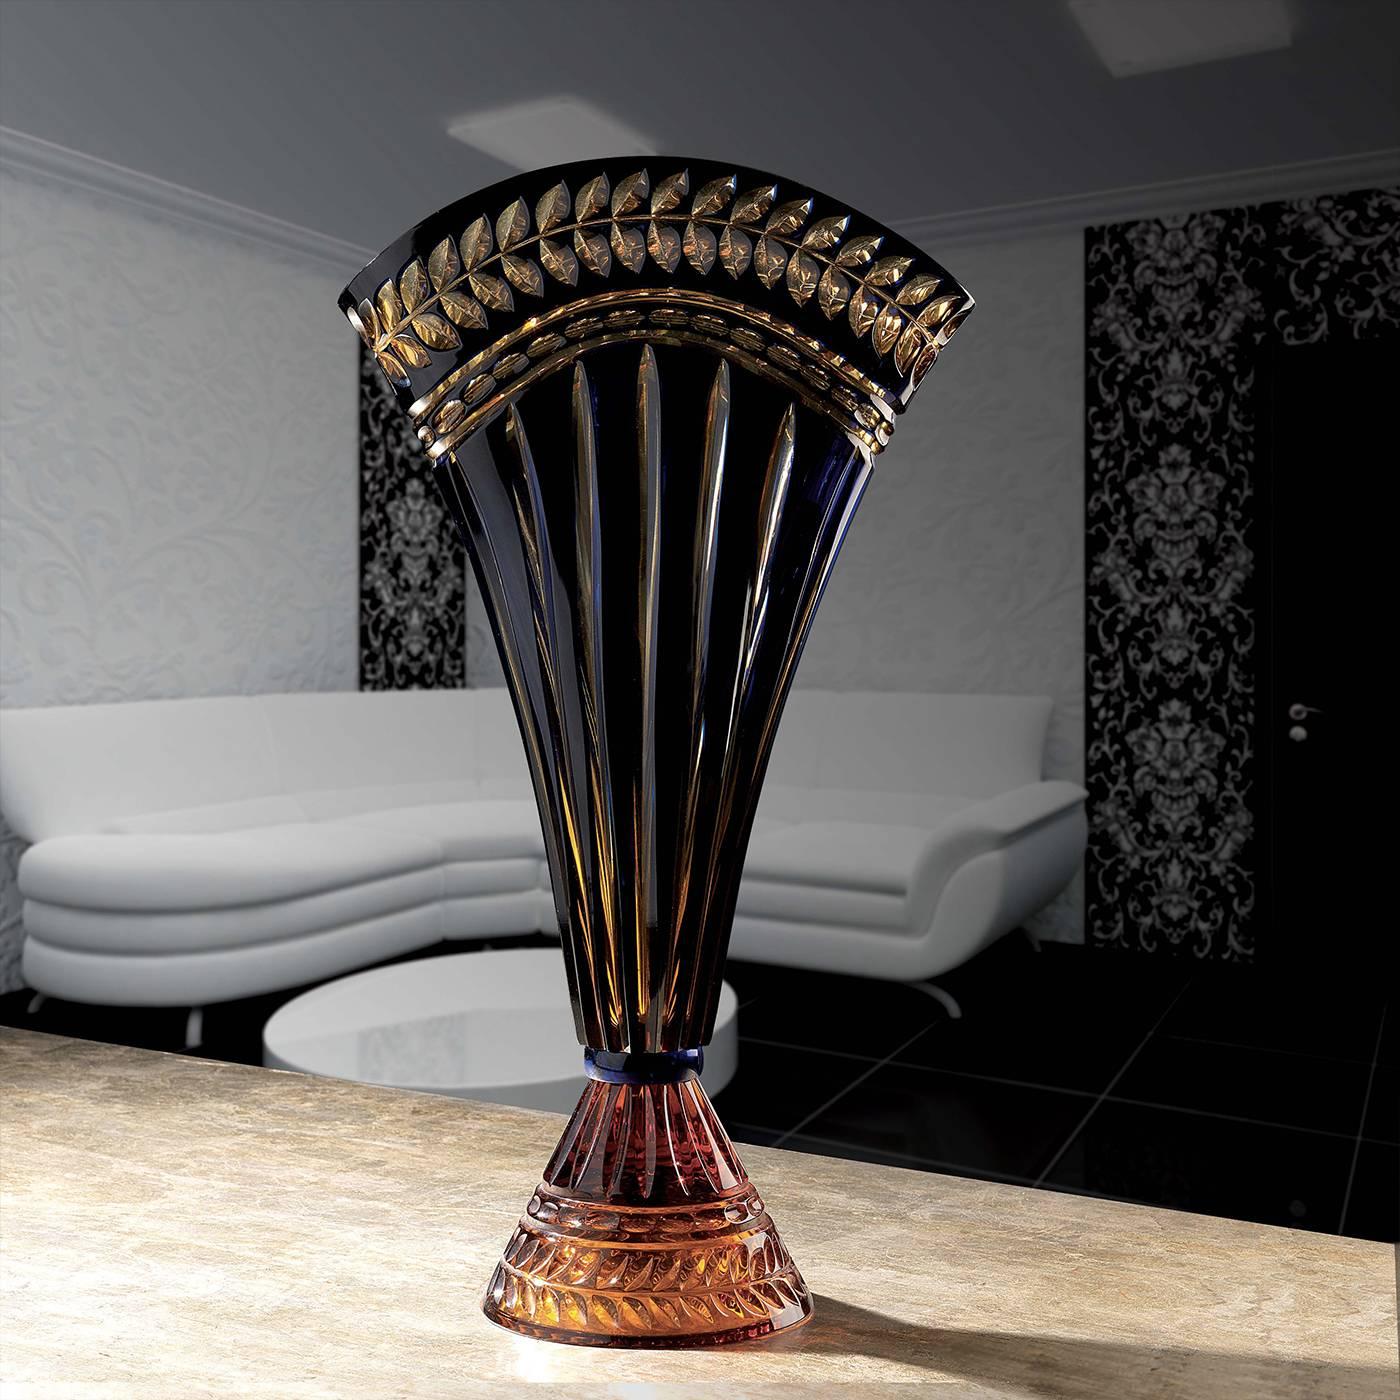 Evoking Classical Roman designs, this handcrafted, blown crystal vase has a unique fan-shaped Silhouette highlighted by shades of amber and blue. An amber, conical base supports a majestic body of 'incamiciato' glass with vertical ridges that